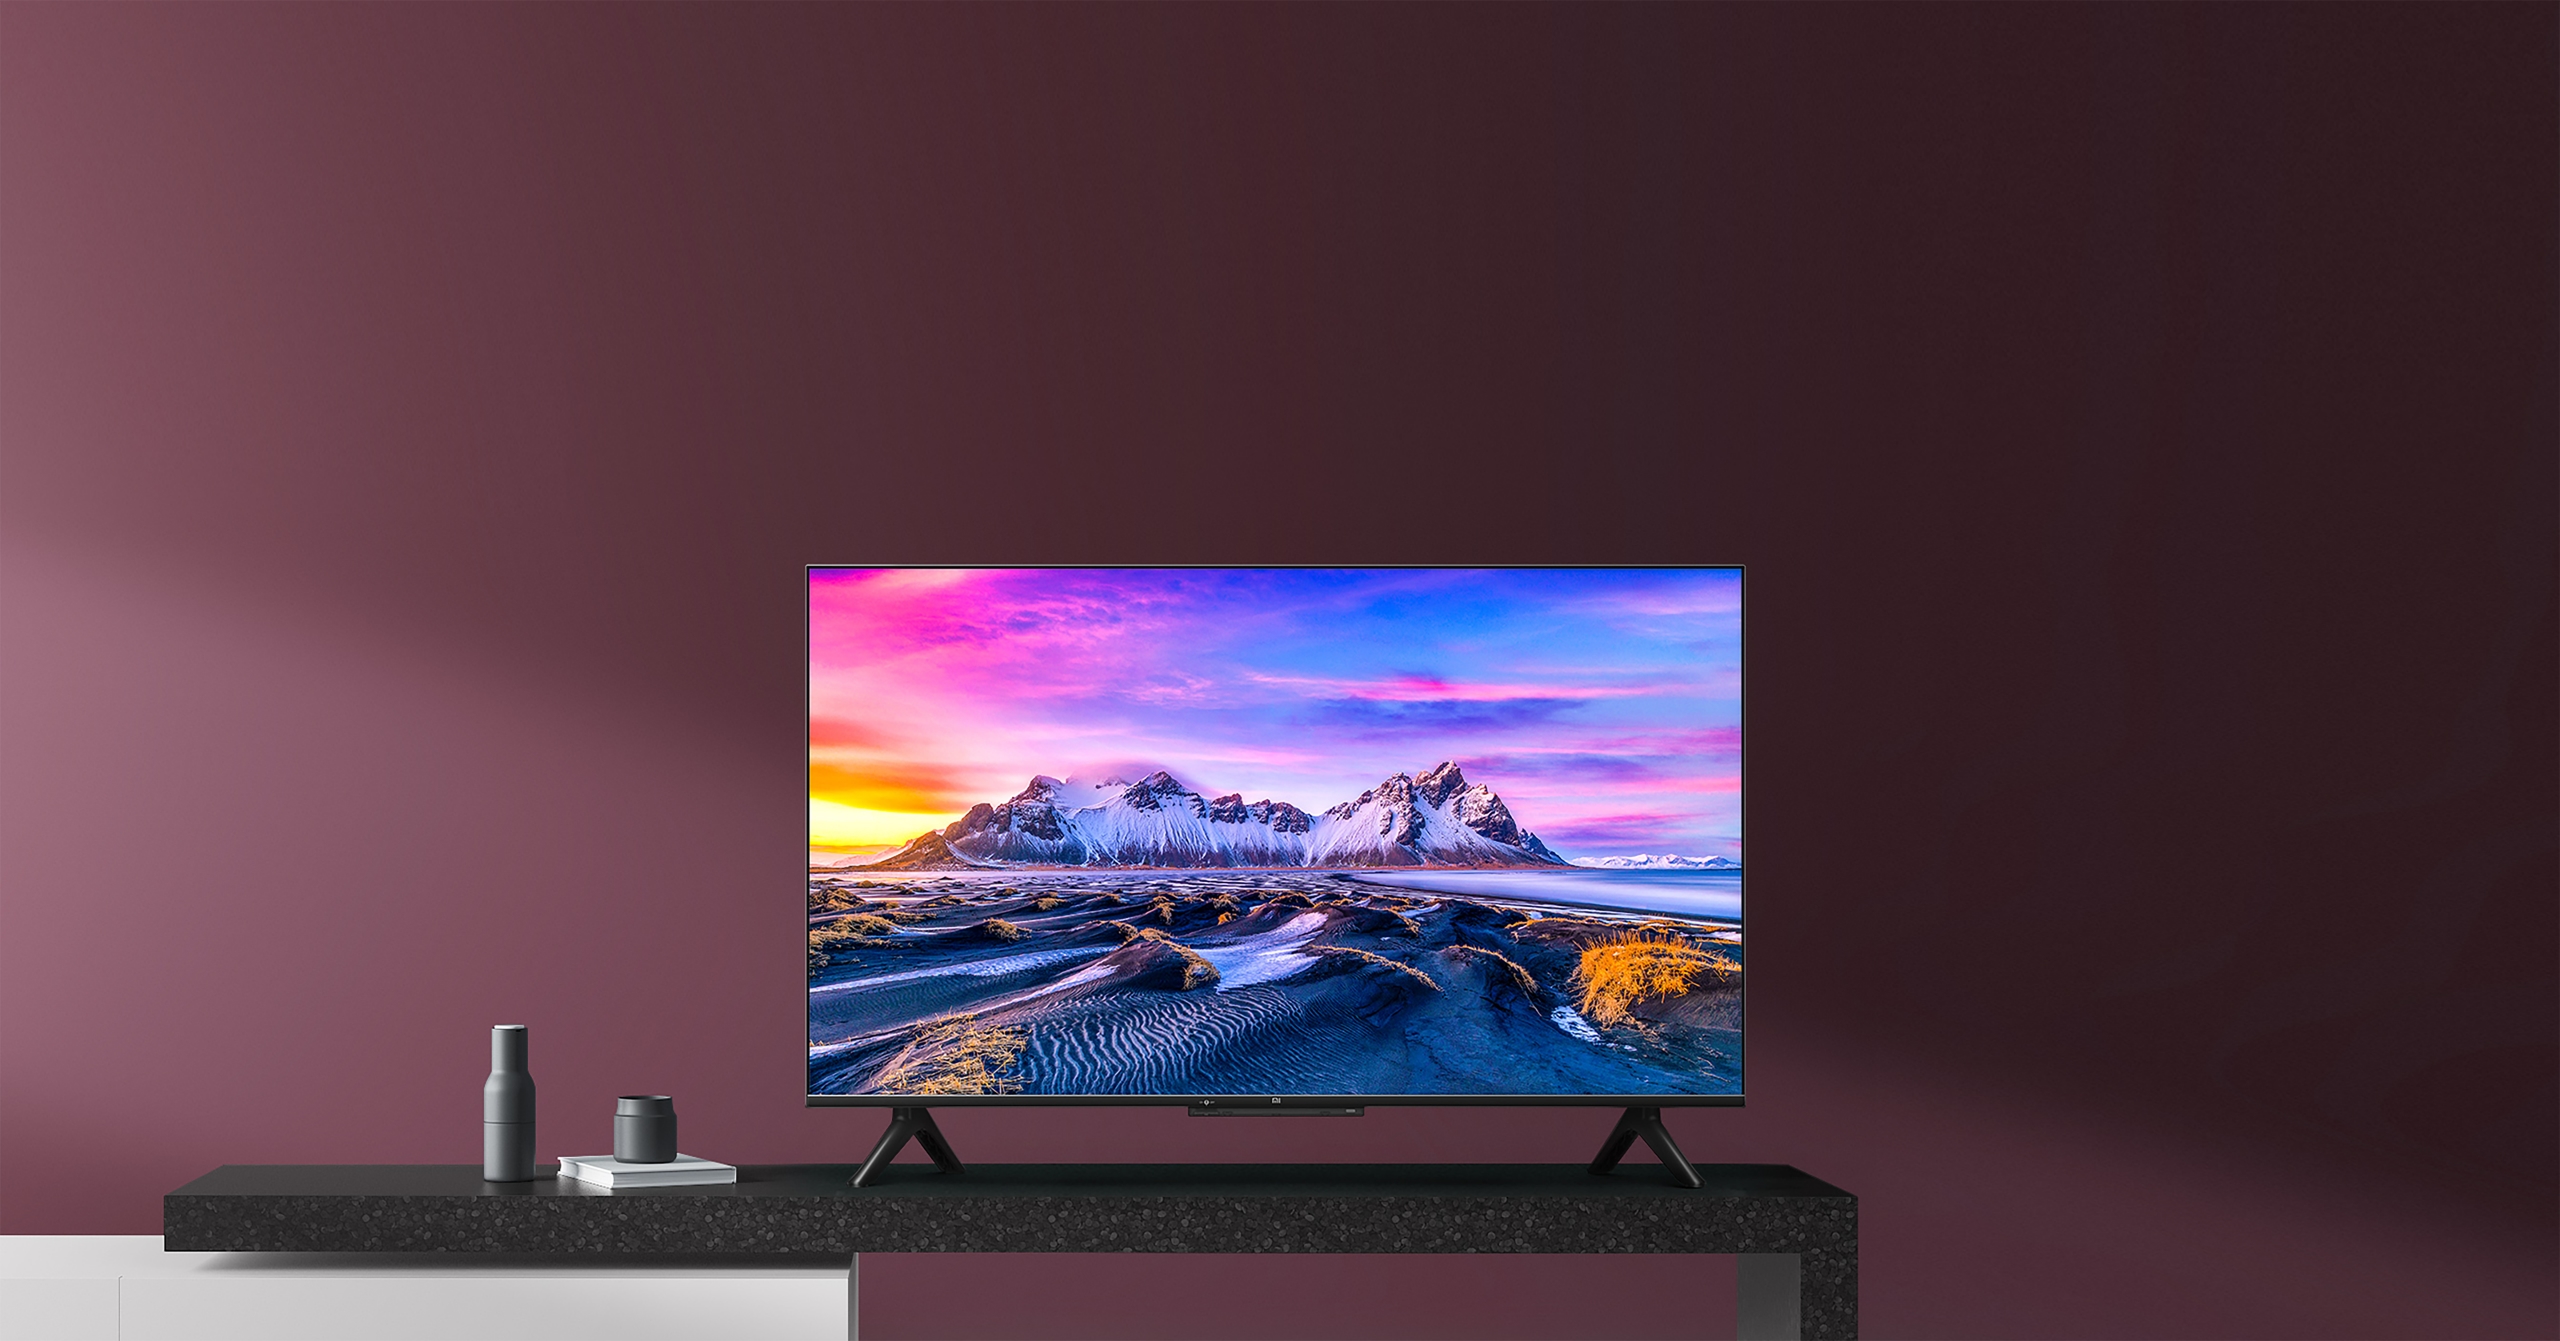 Xiaomi has released an application that will tell you if your TV screen can fall off